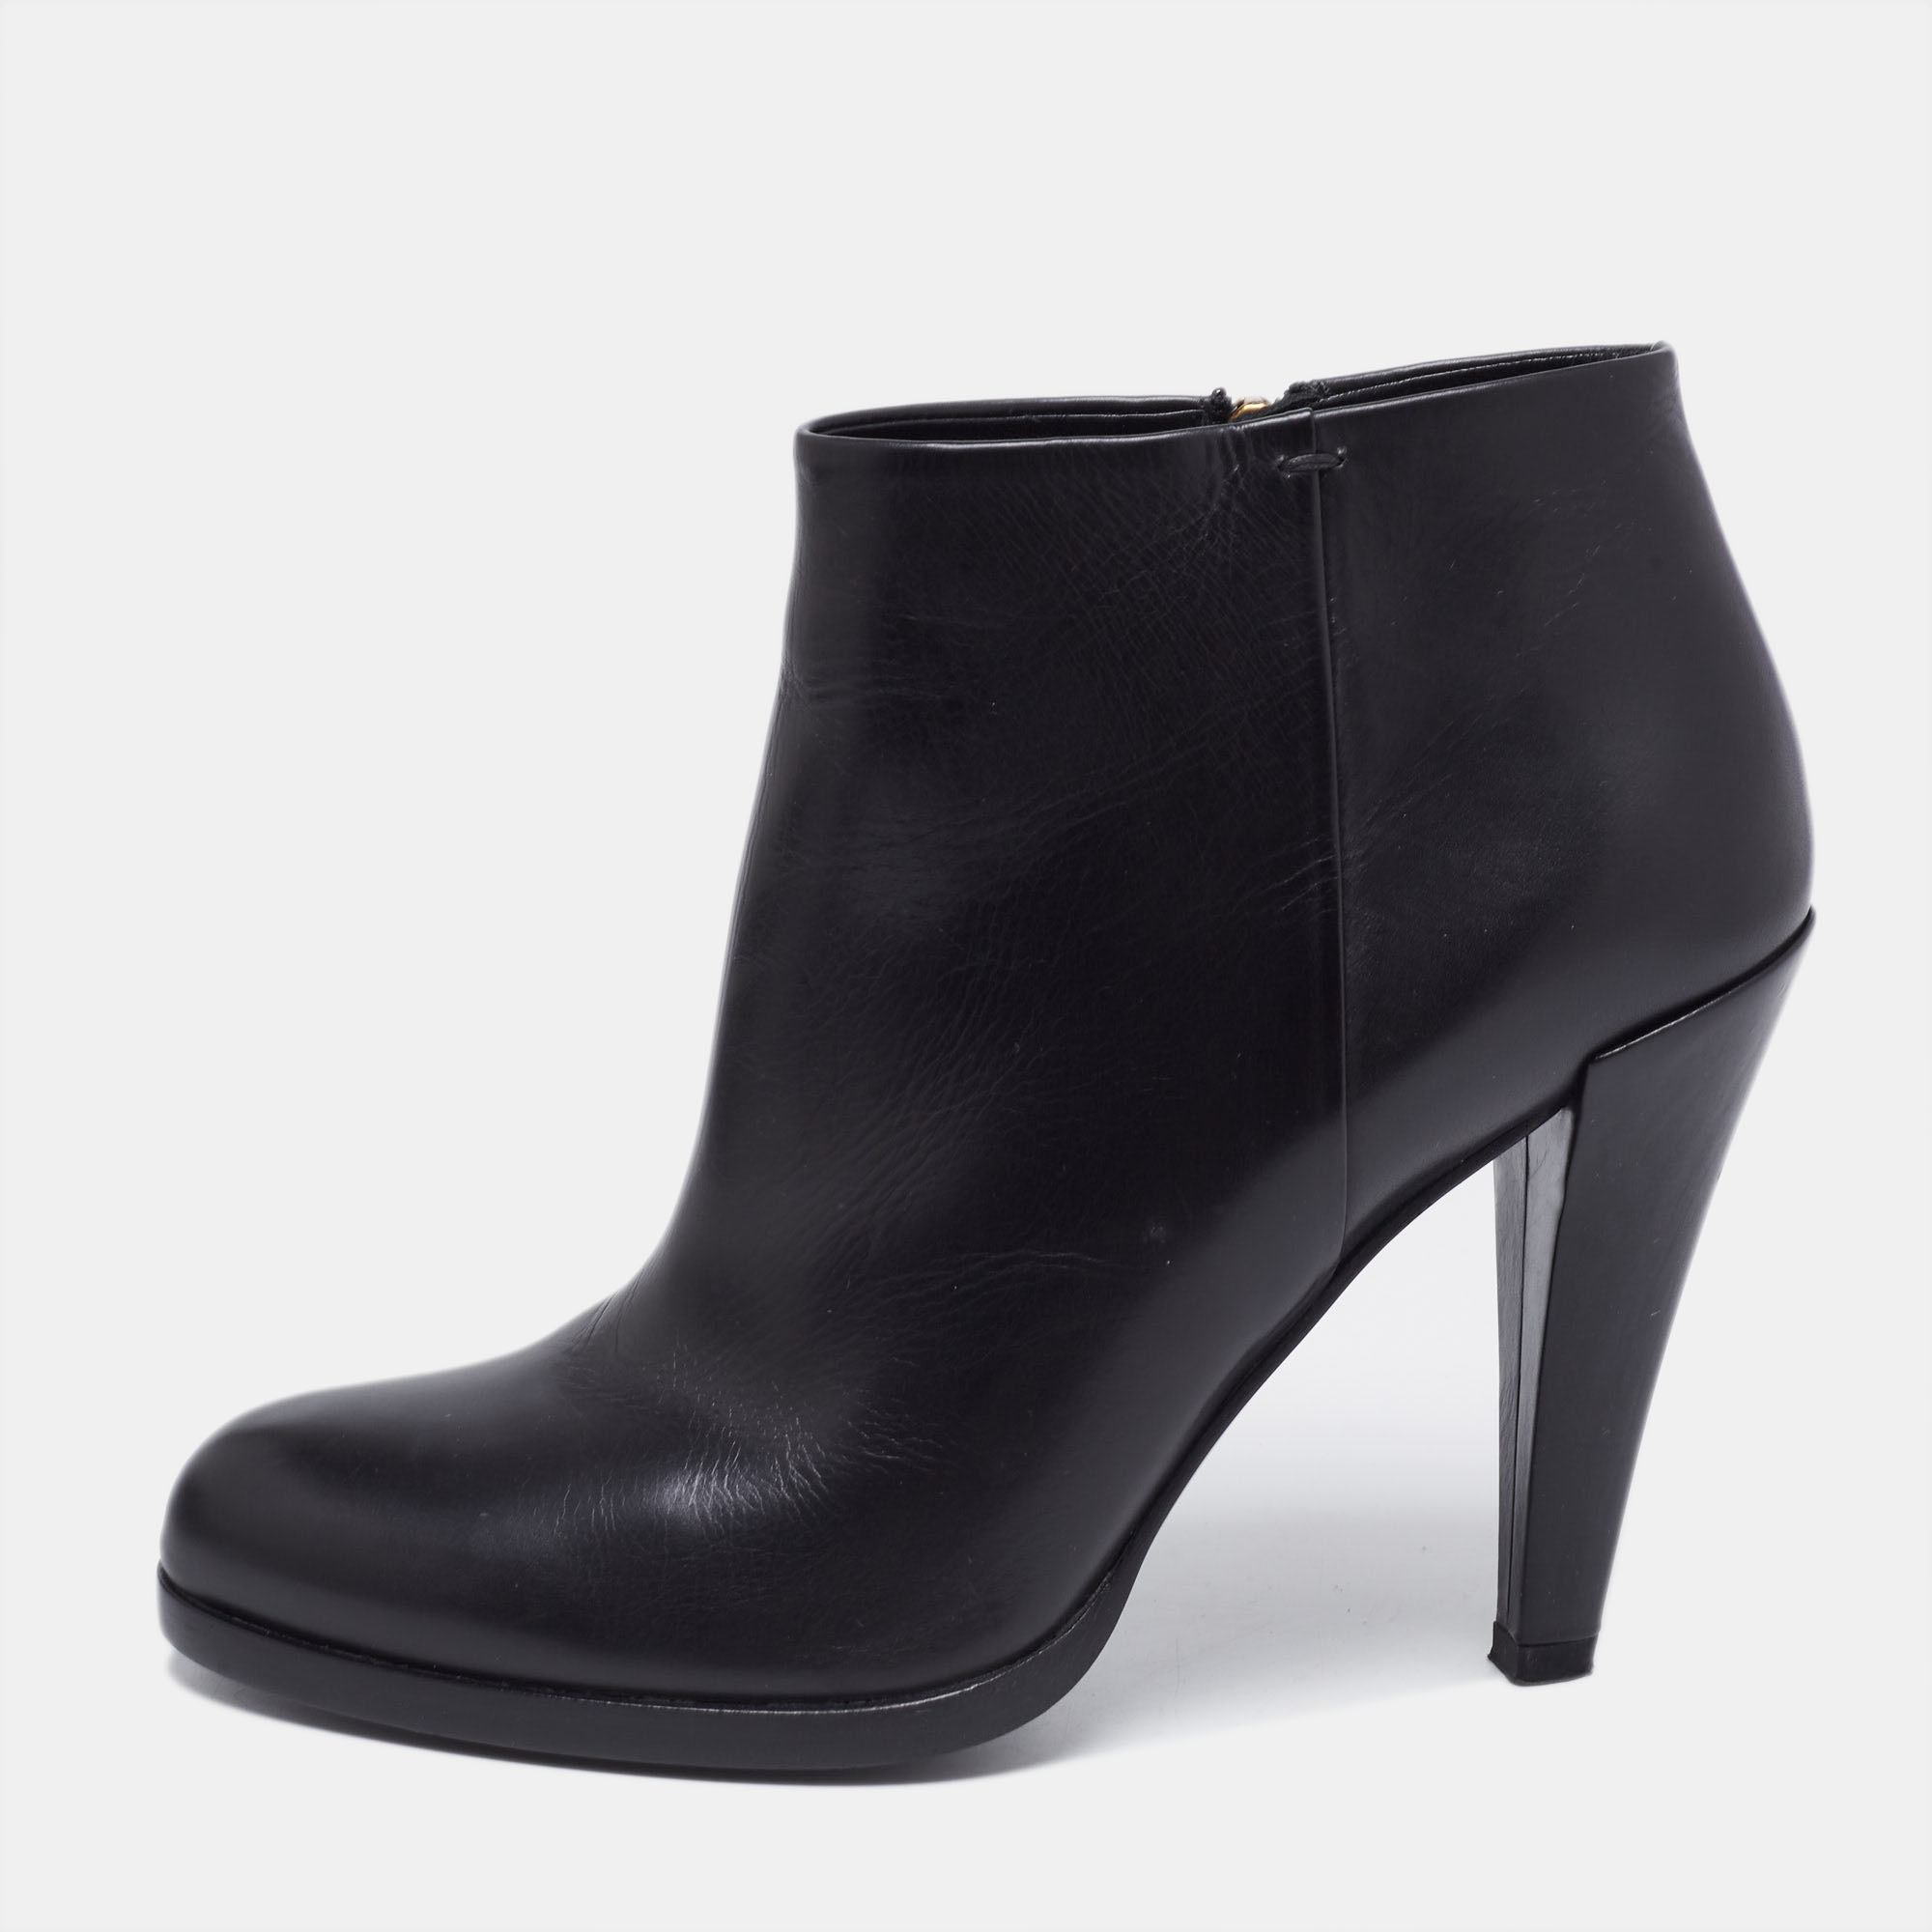 Gucci Black Leather Block Heel Ankle Boots Size 38.5